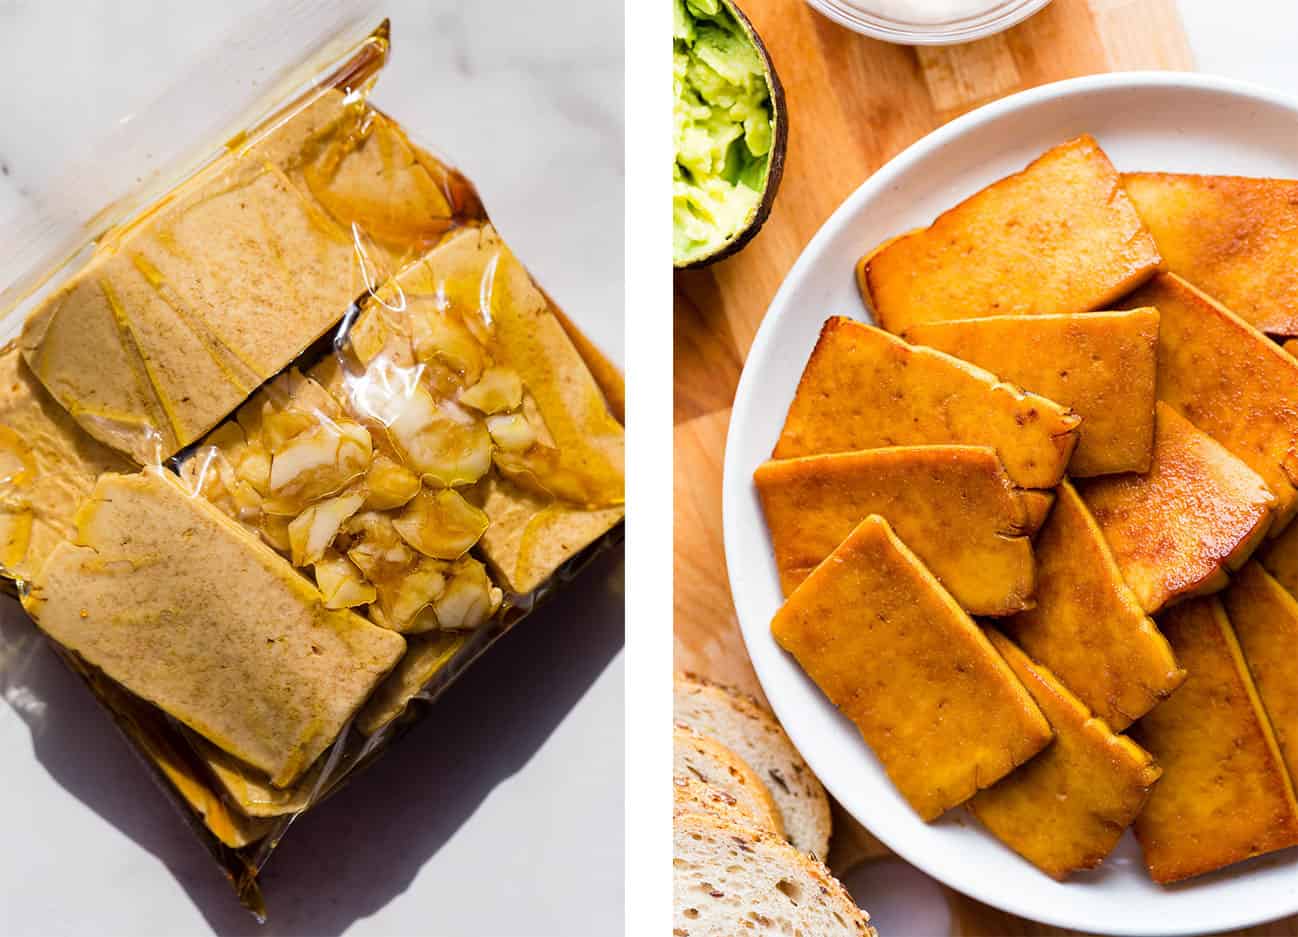 Left: marinating tofu in a plastic food storage bag. Right - cooked slices of marinated smoky maple tofu.